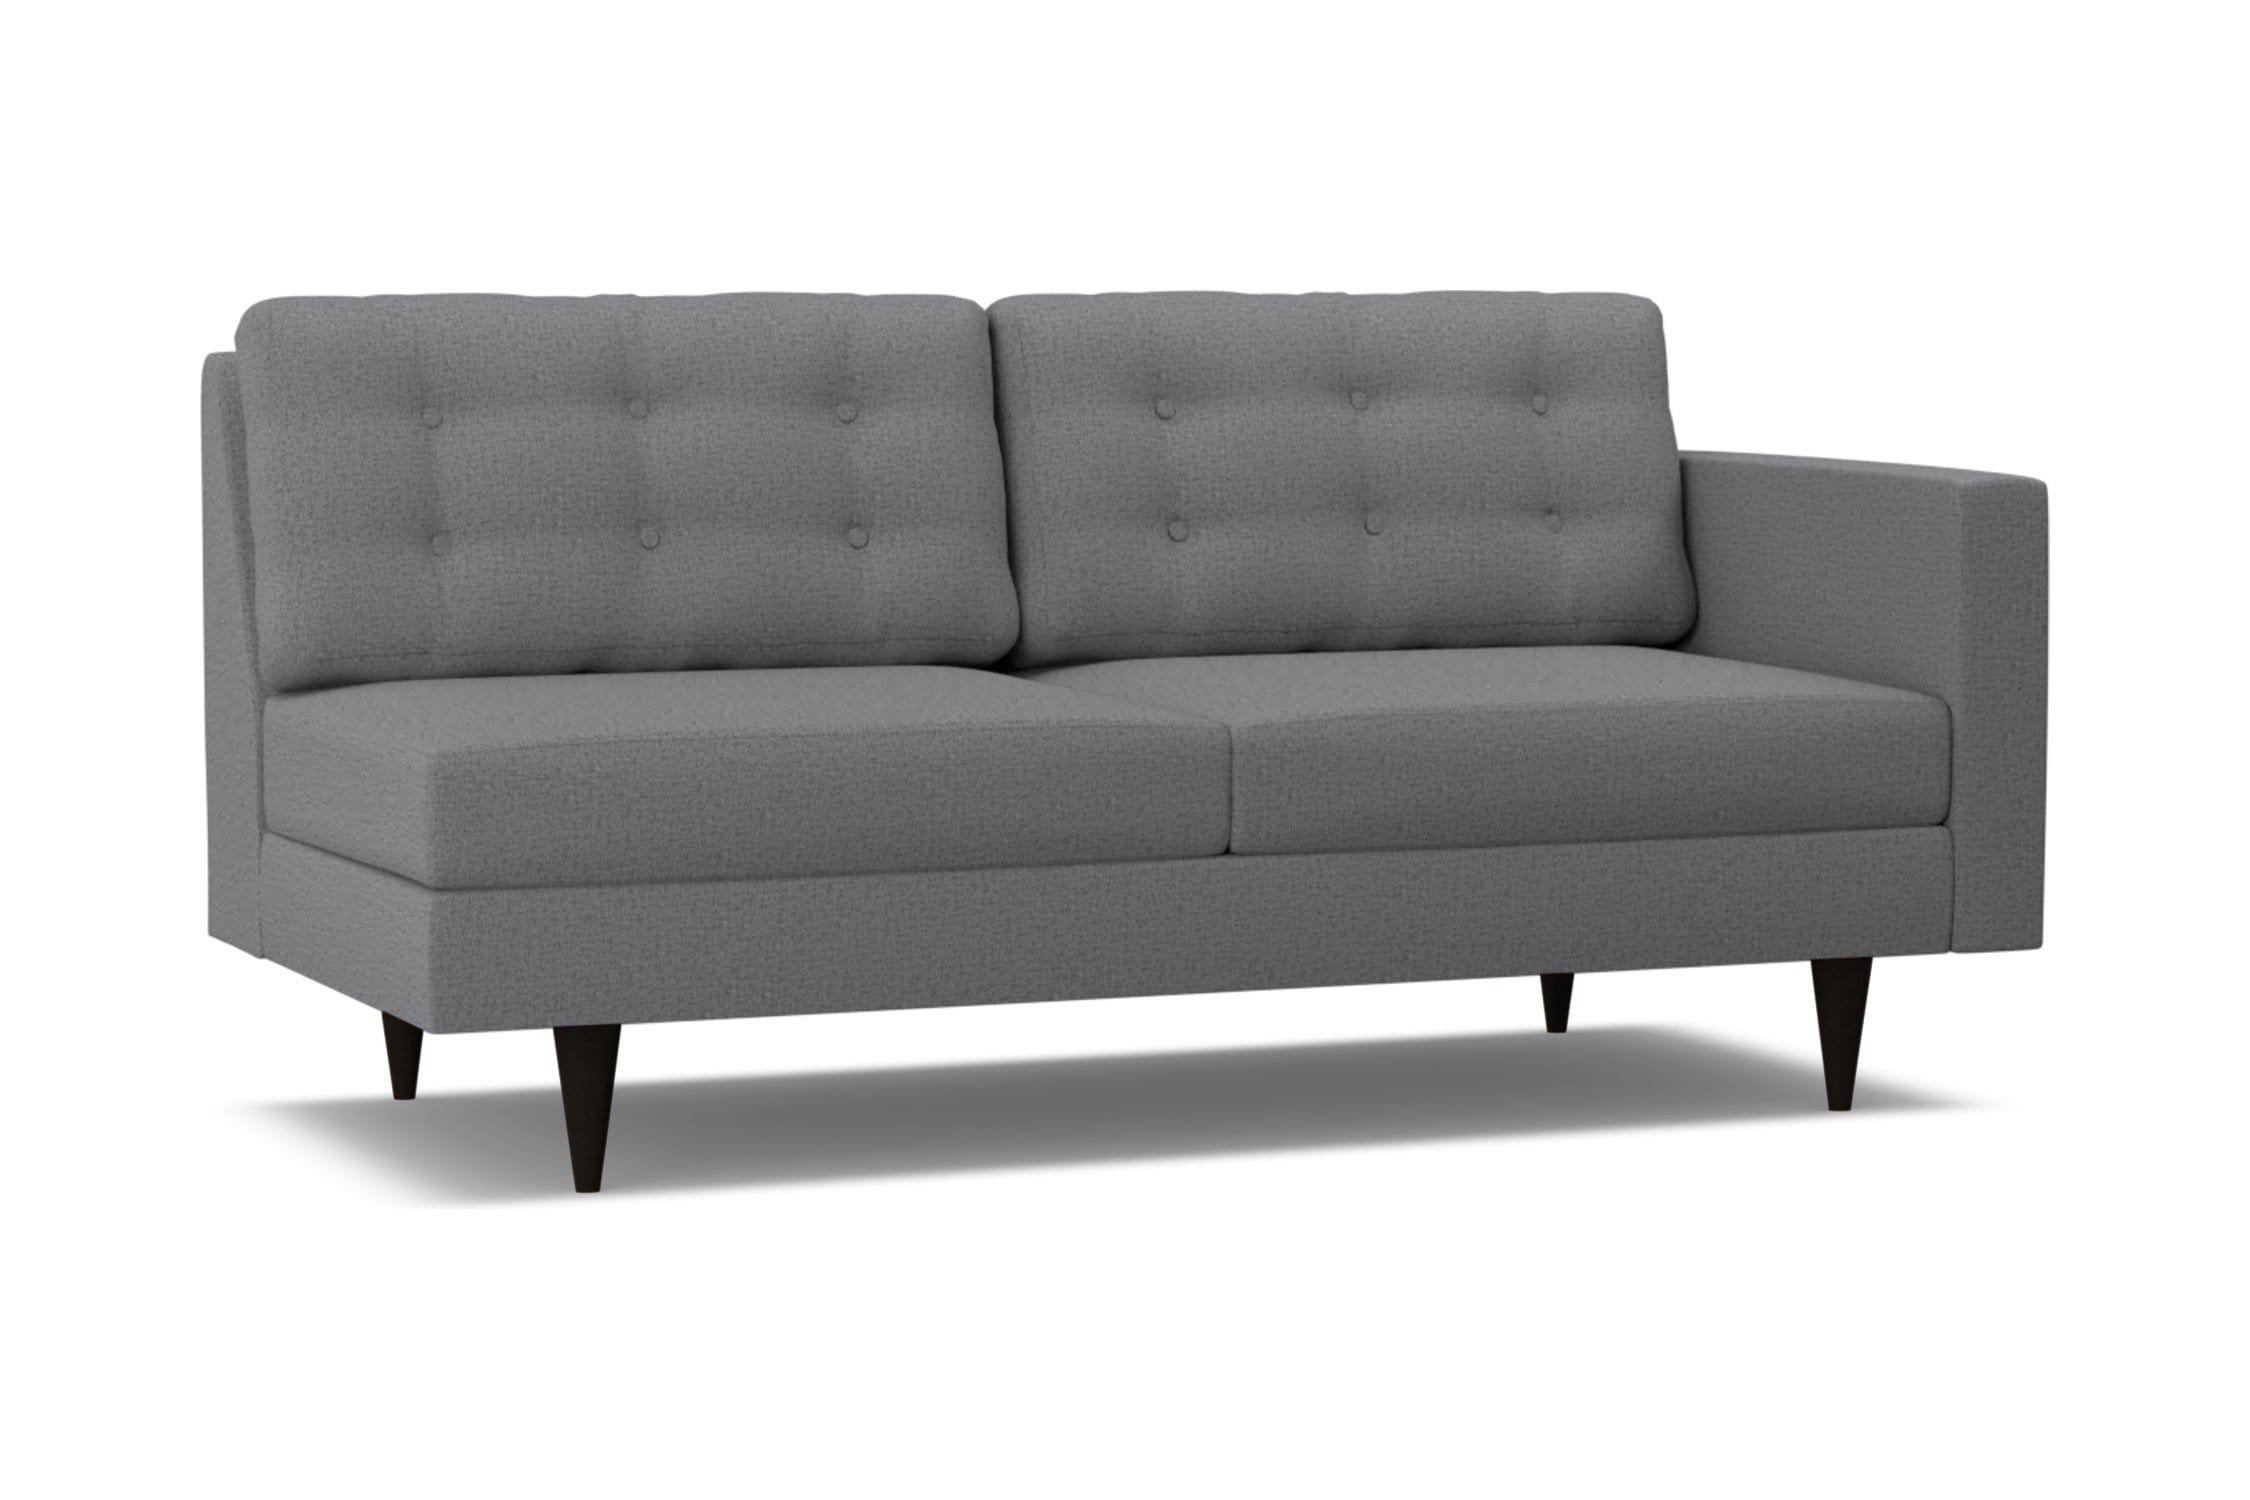 Logan Right Arm Sofa - Grey -  Modular Collection - Build Your Own Sectional